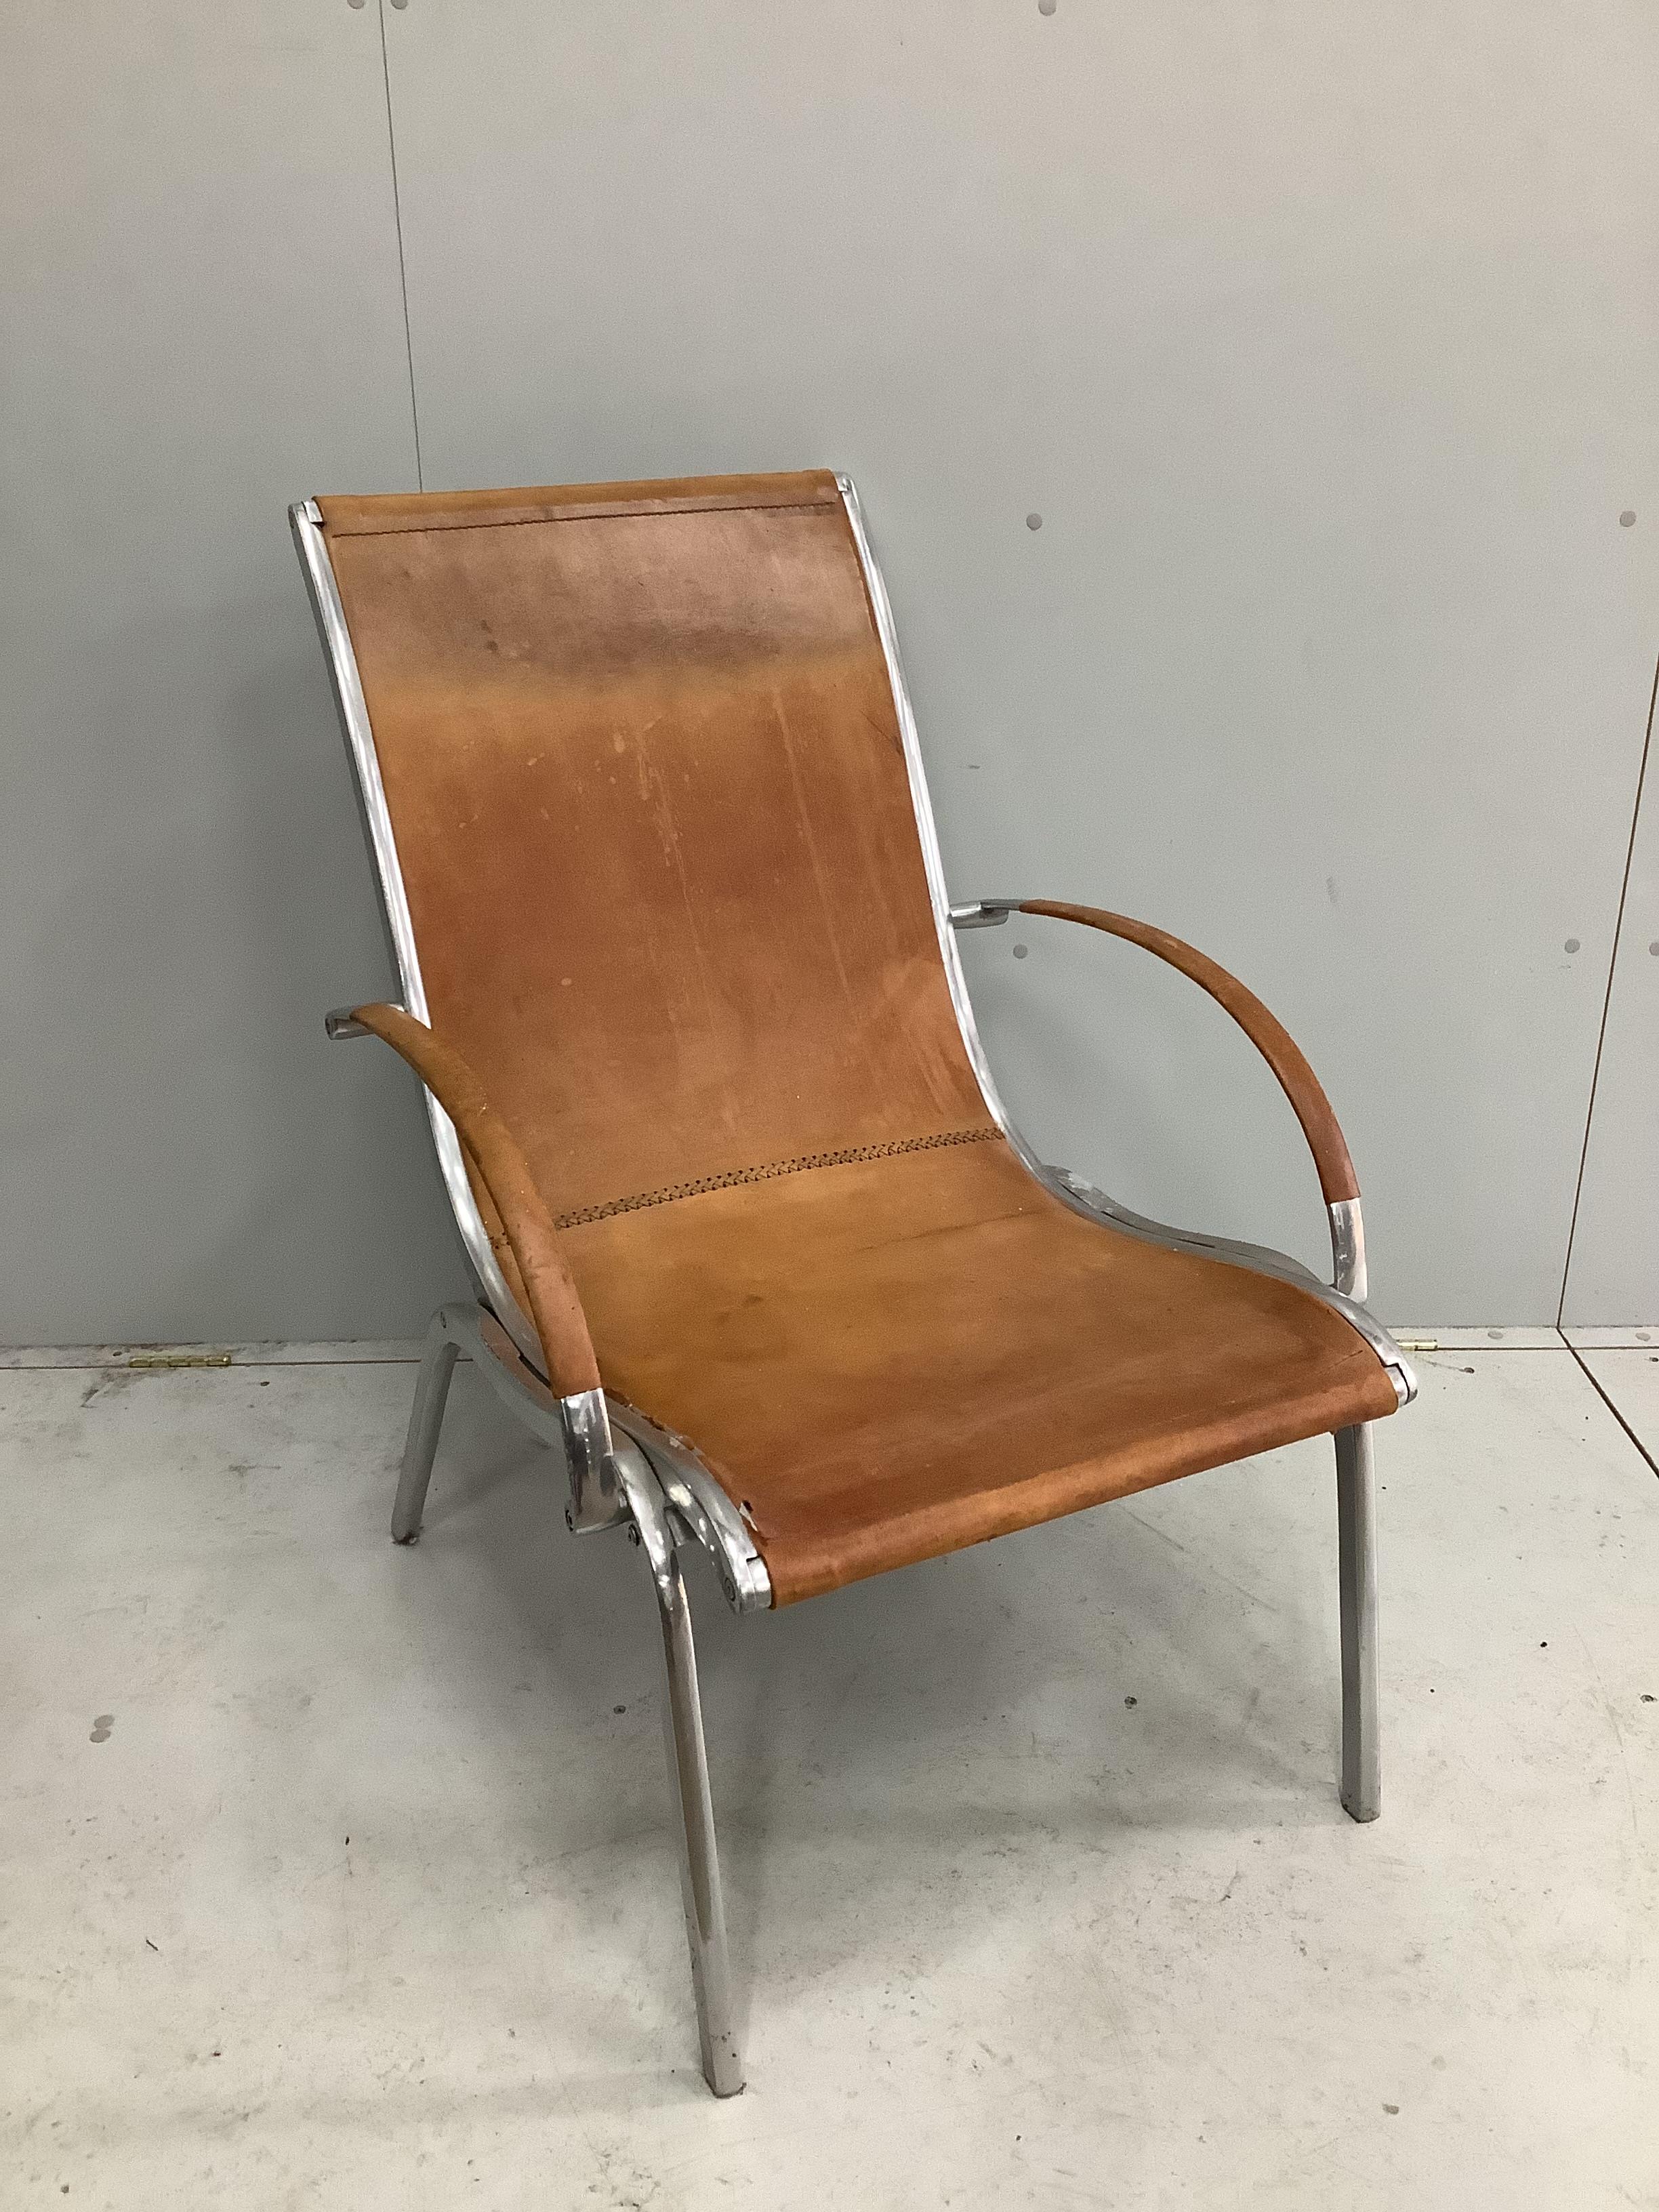 An aluminium and tan leather armchair in the manner of Rodolf Szedleczky (seat in need of repair), width 65cm, depth 84cm, height 94cm